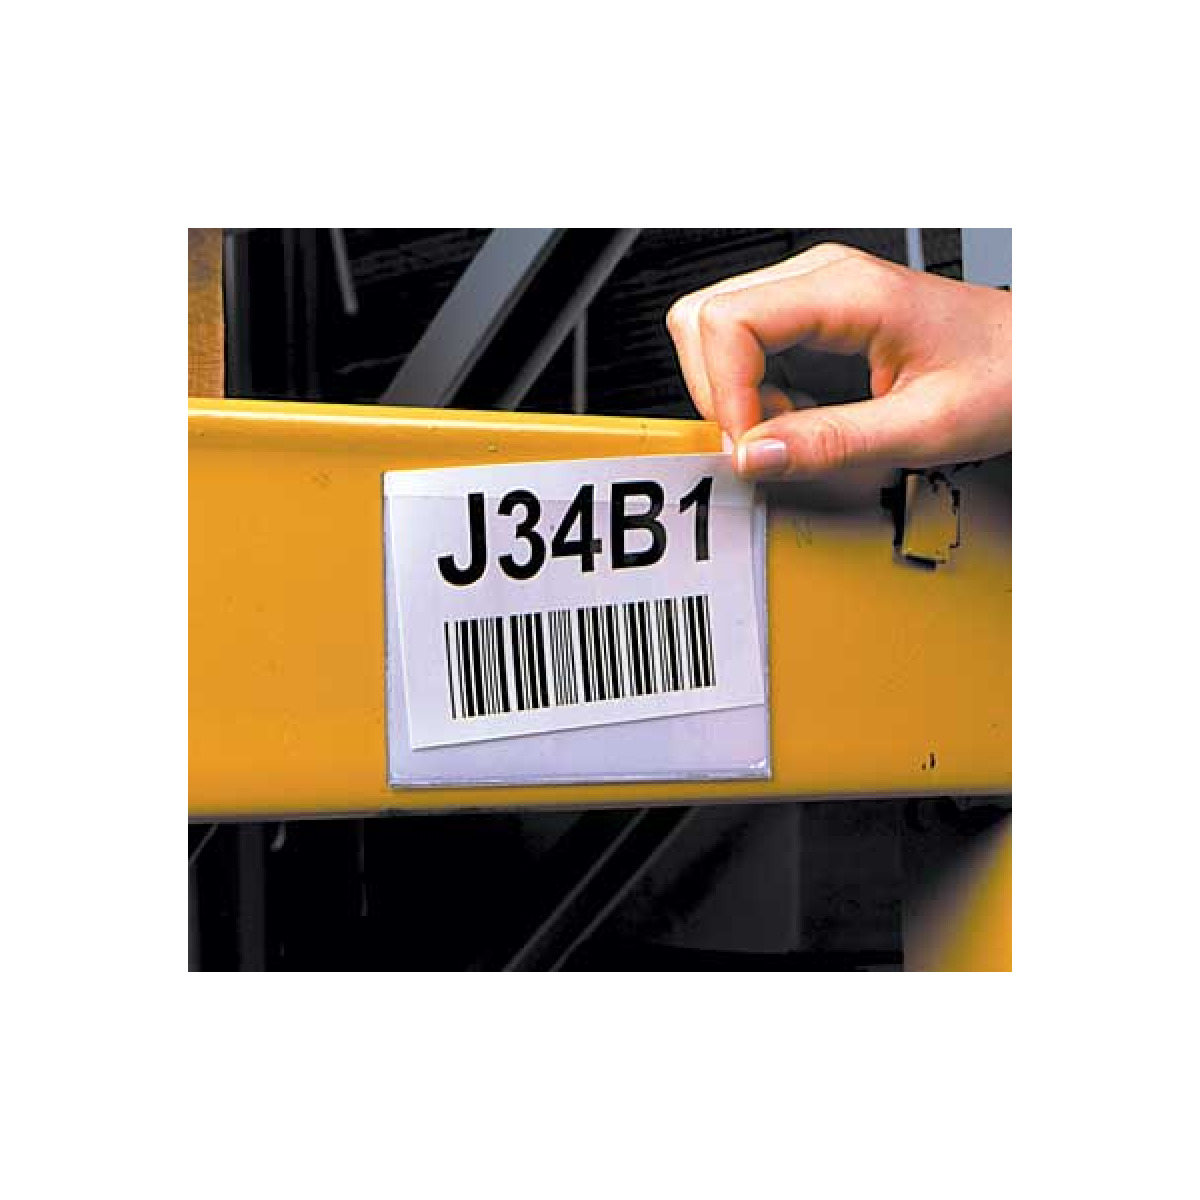 Warehouse pallet rack label holders for product locations